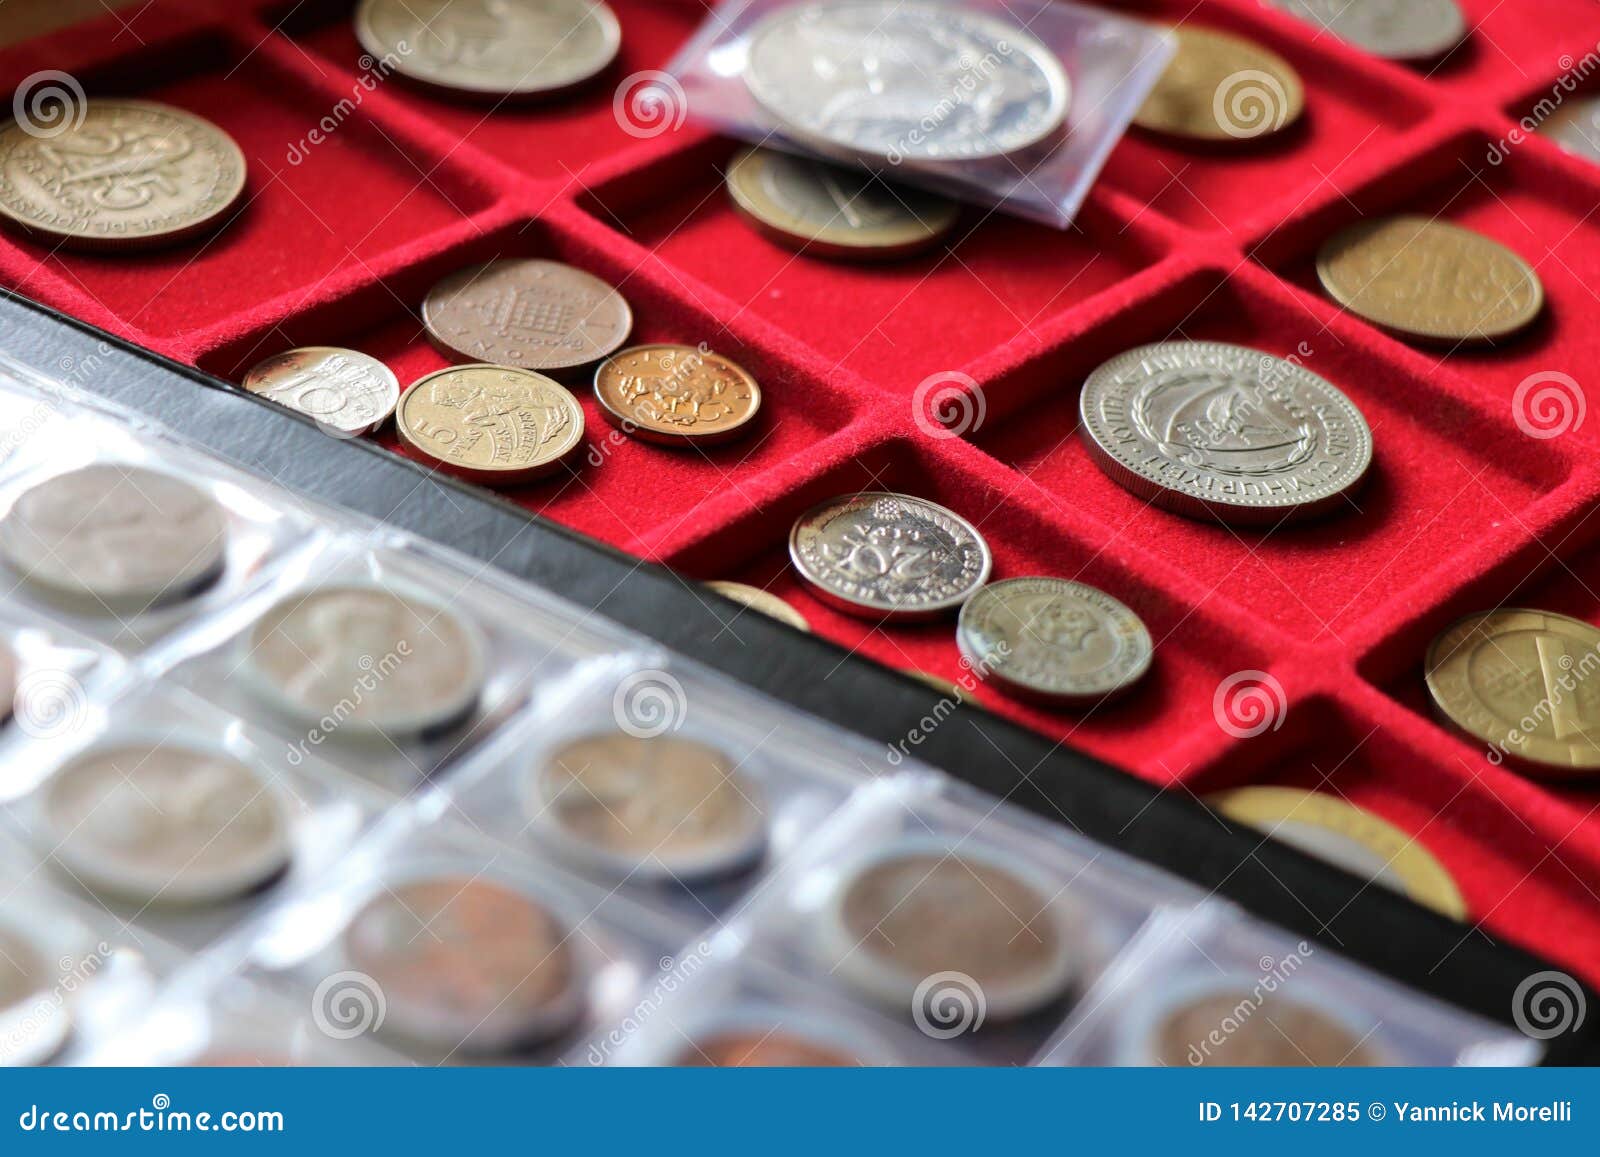 numismatic, world coins collection on a red tray.